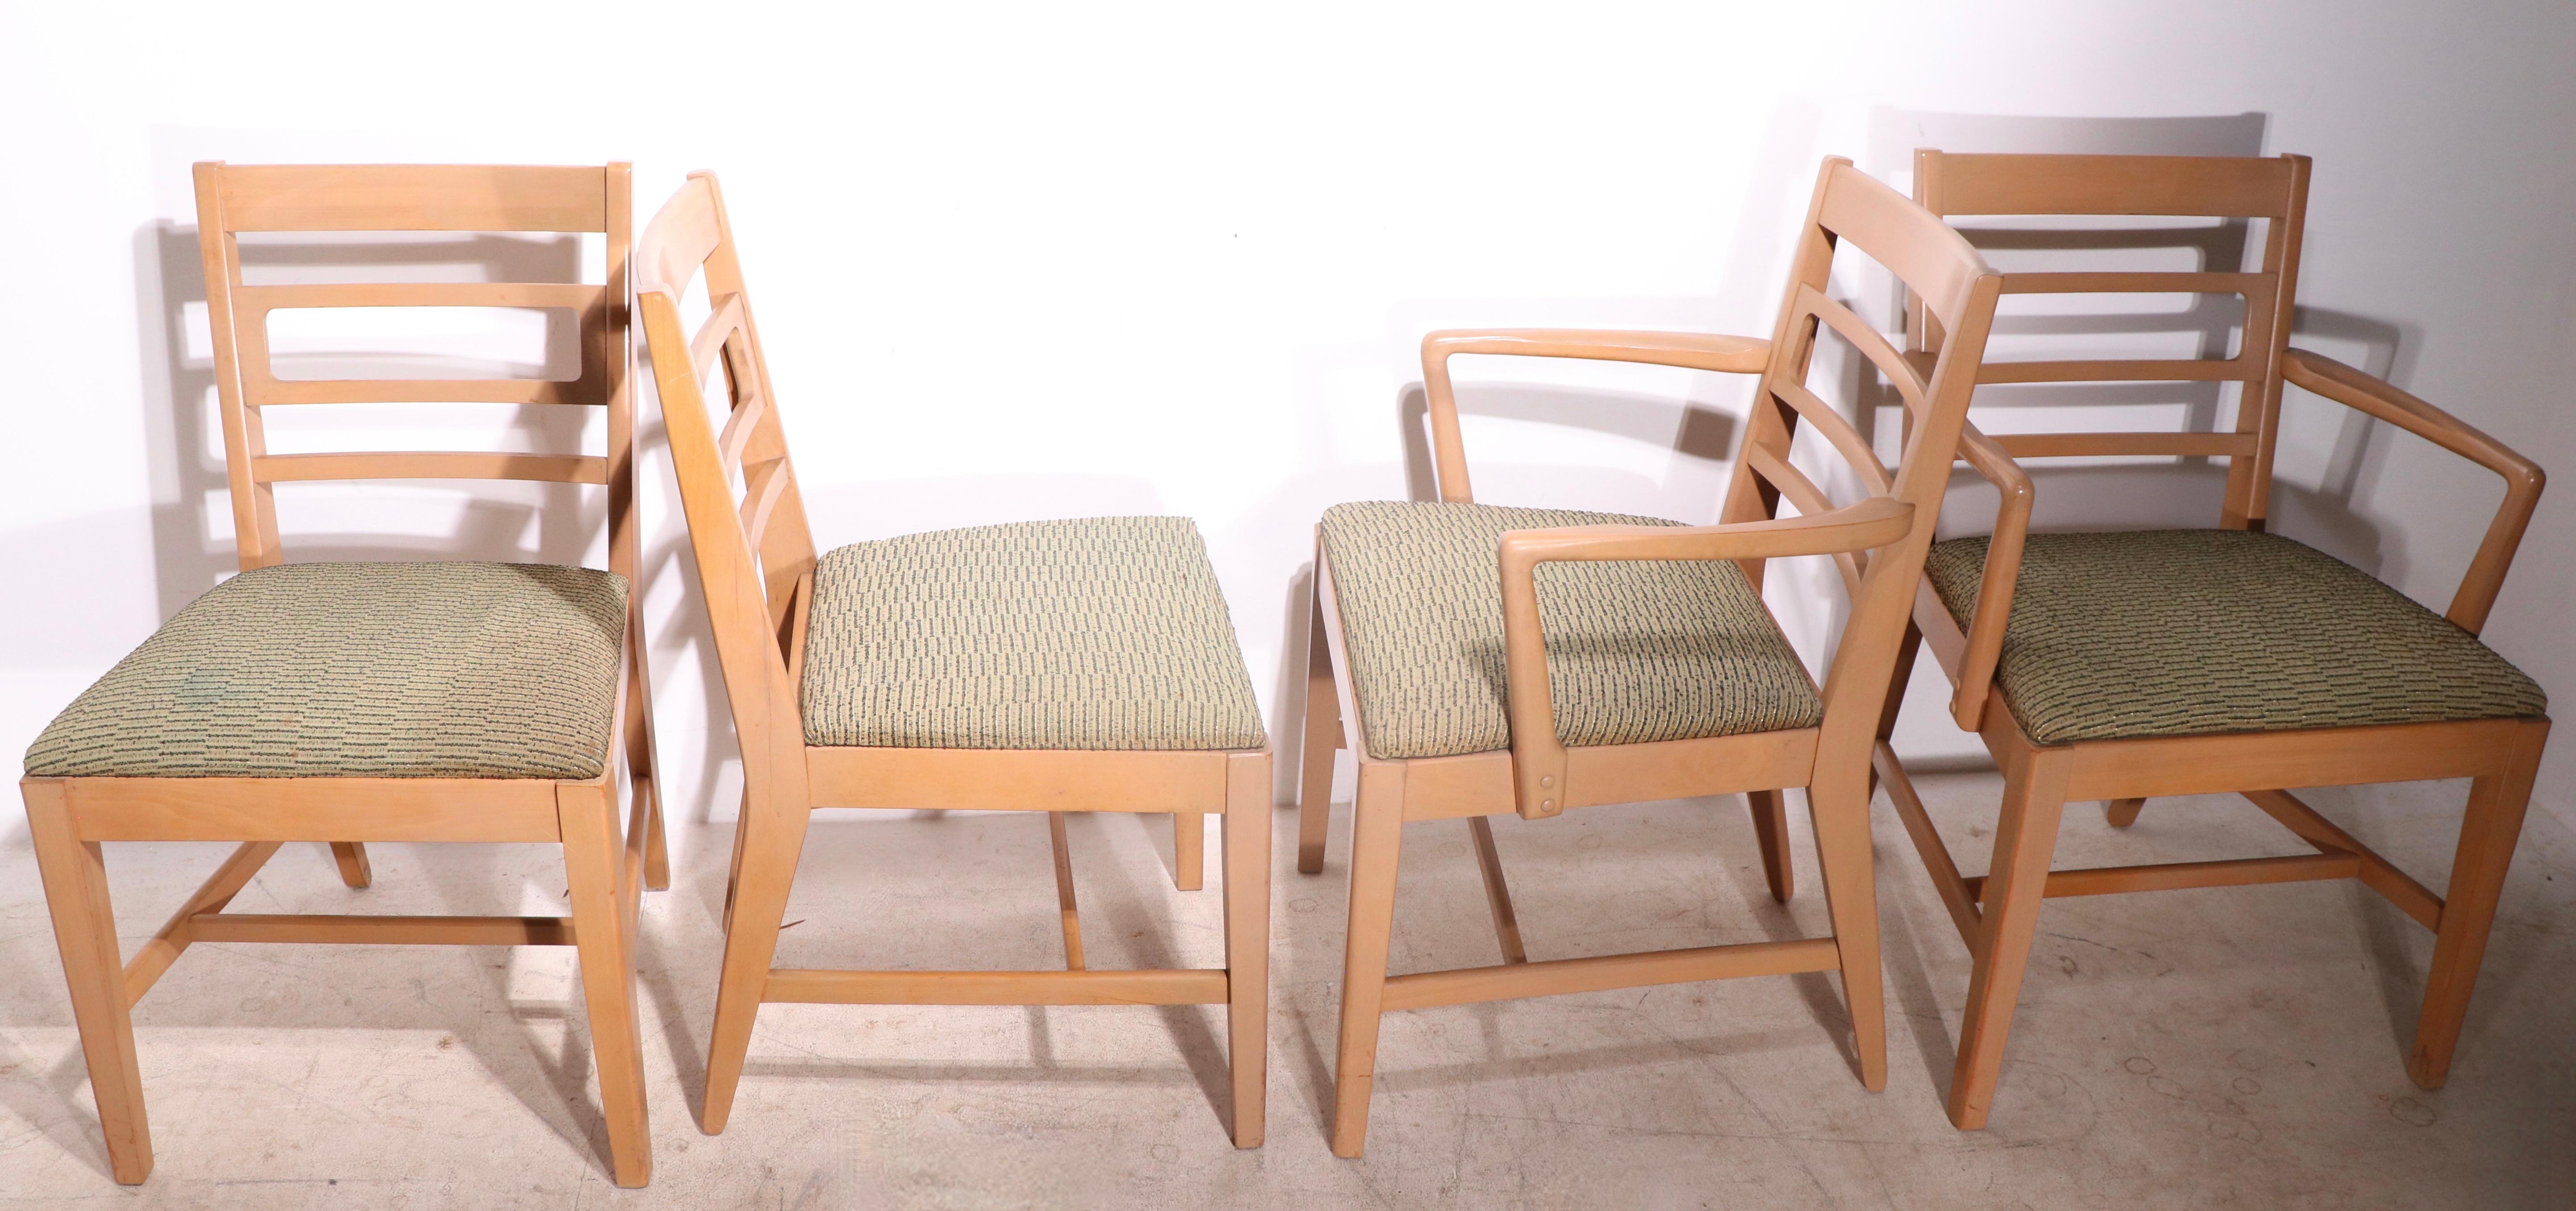 Upholstery Set of Six Mid Century Dining Chairs Drexel Precedent by Wormley For Sale